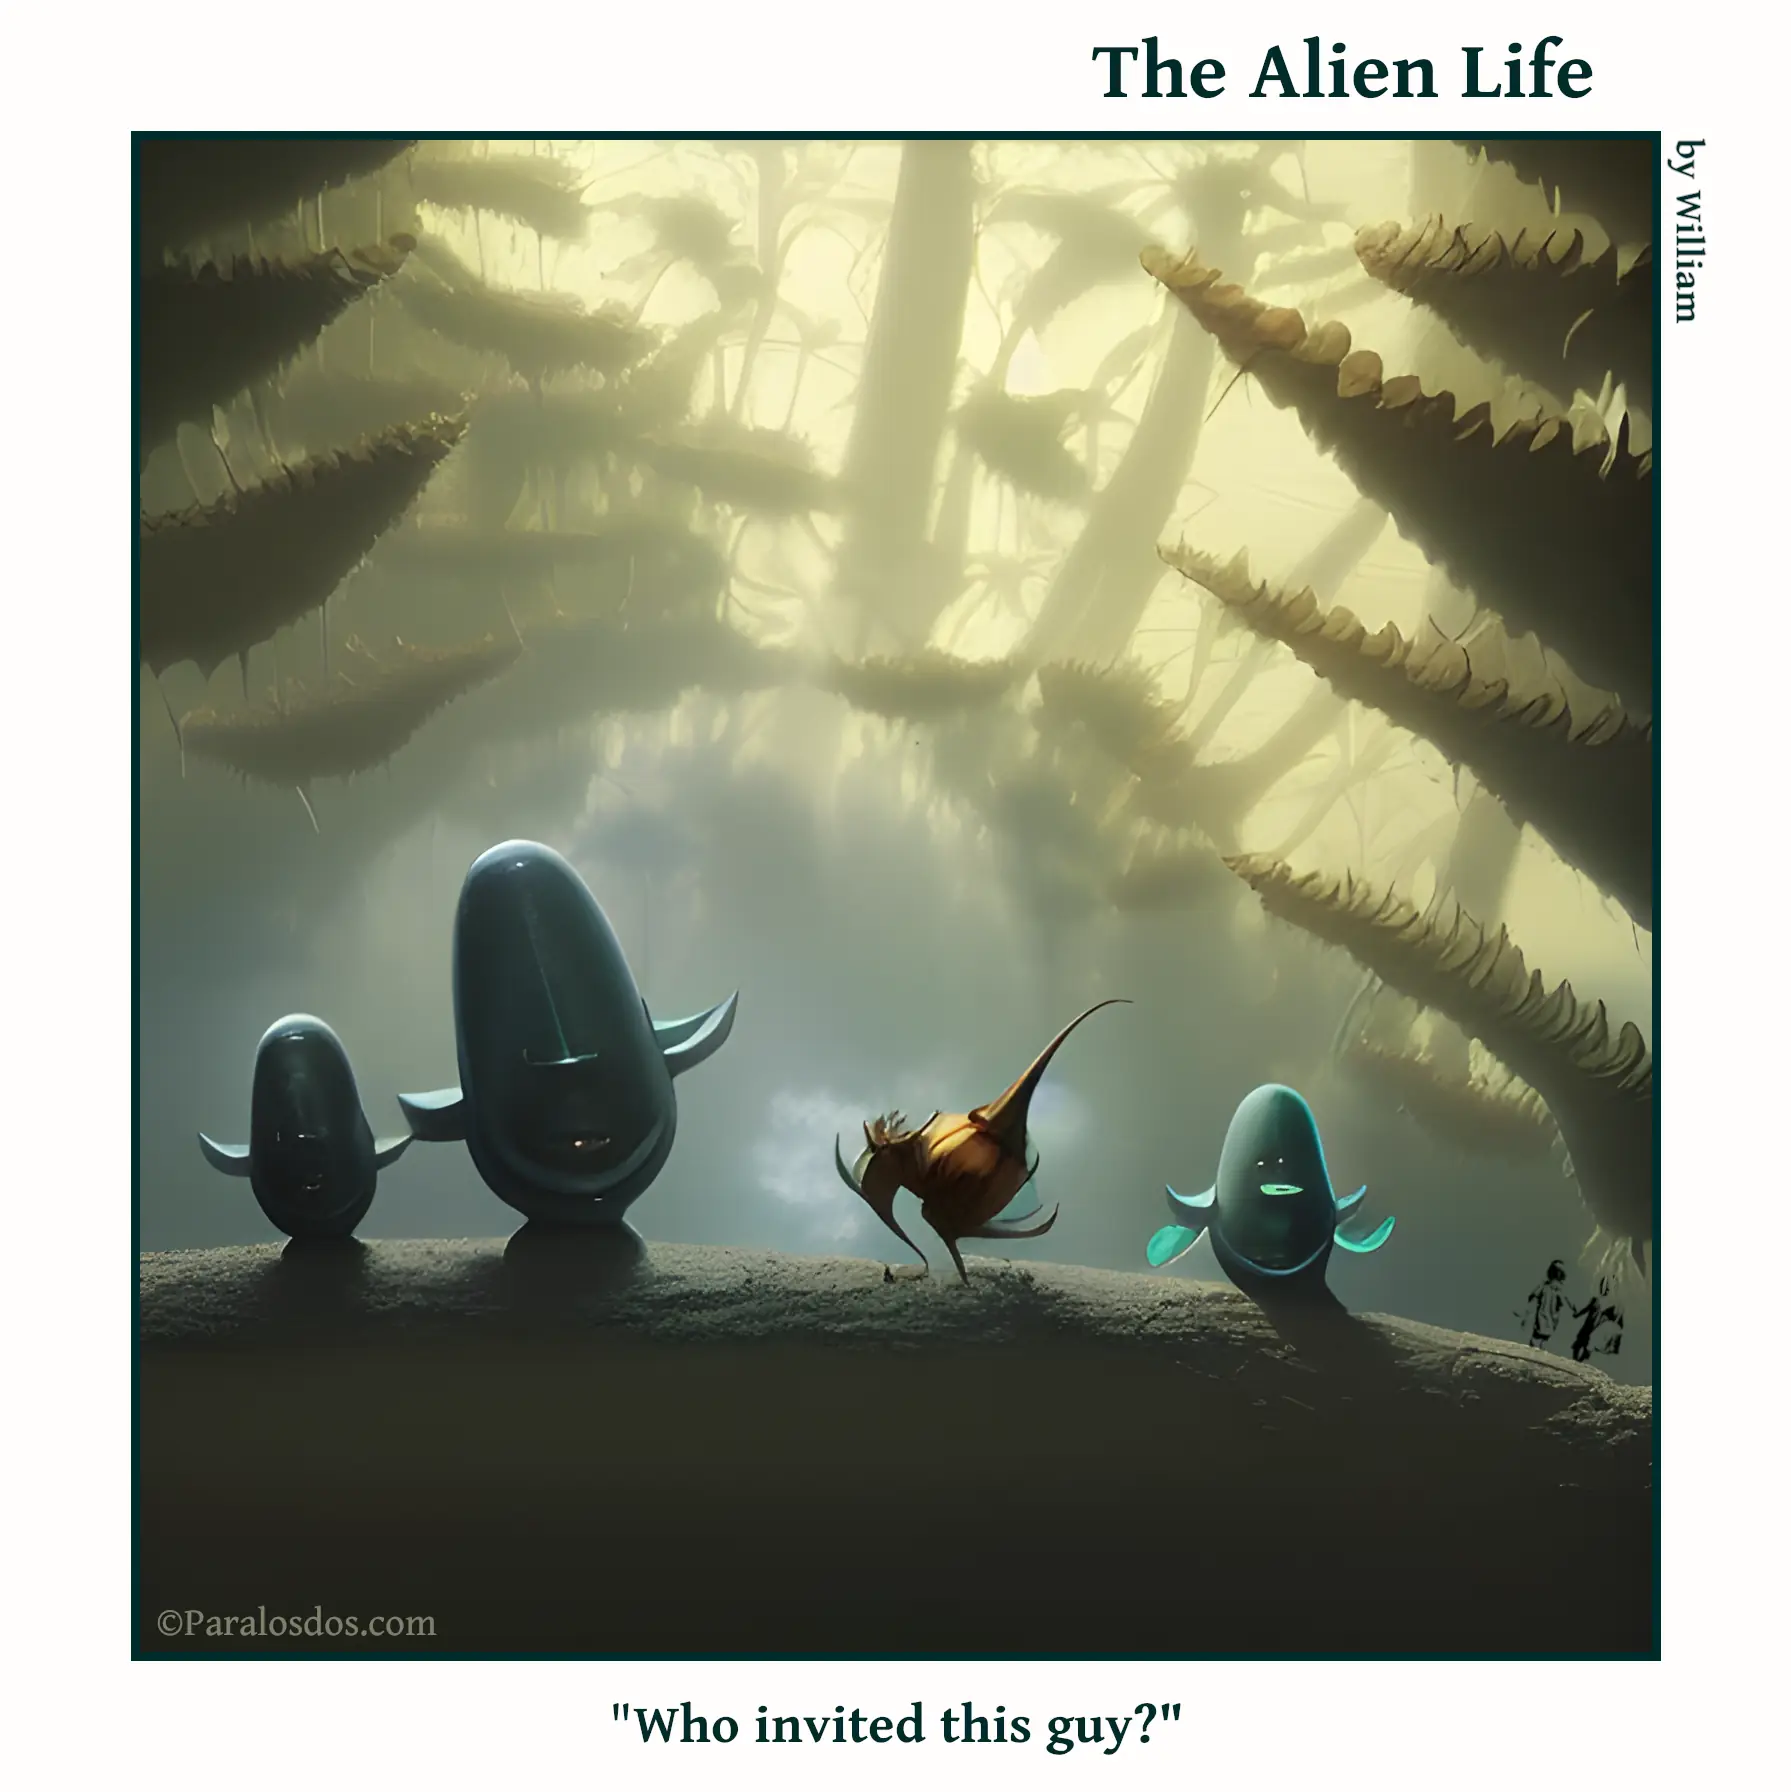 The Alien Life, one panel Comic. Four aliens are sitting in a row on a rock. Three look similar. The fourth is second from the right and is completely different and super weird. The caption reads: "Who invited this guy?"